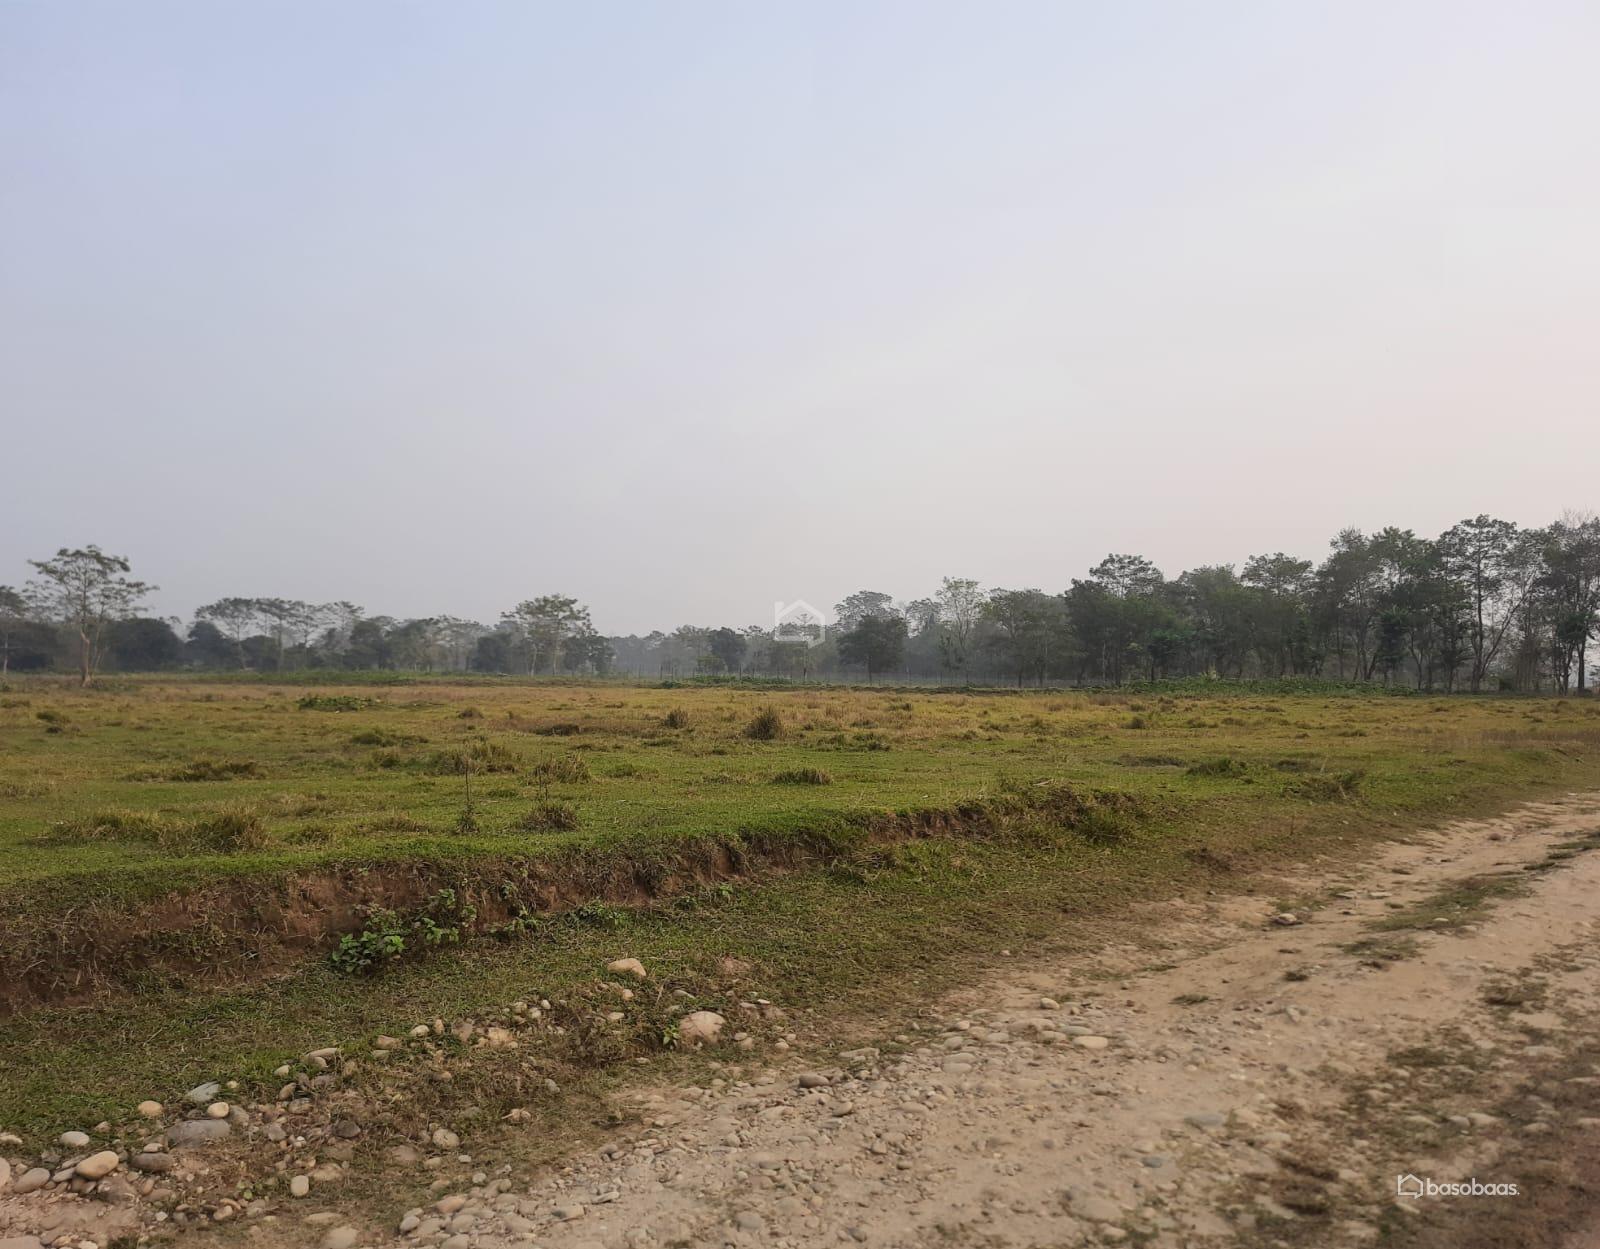 Commercial or Agriculture Land : Land for Sale in Bharatpur, Chitwan Image 1